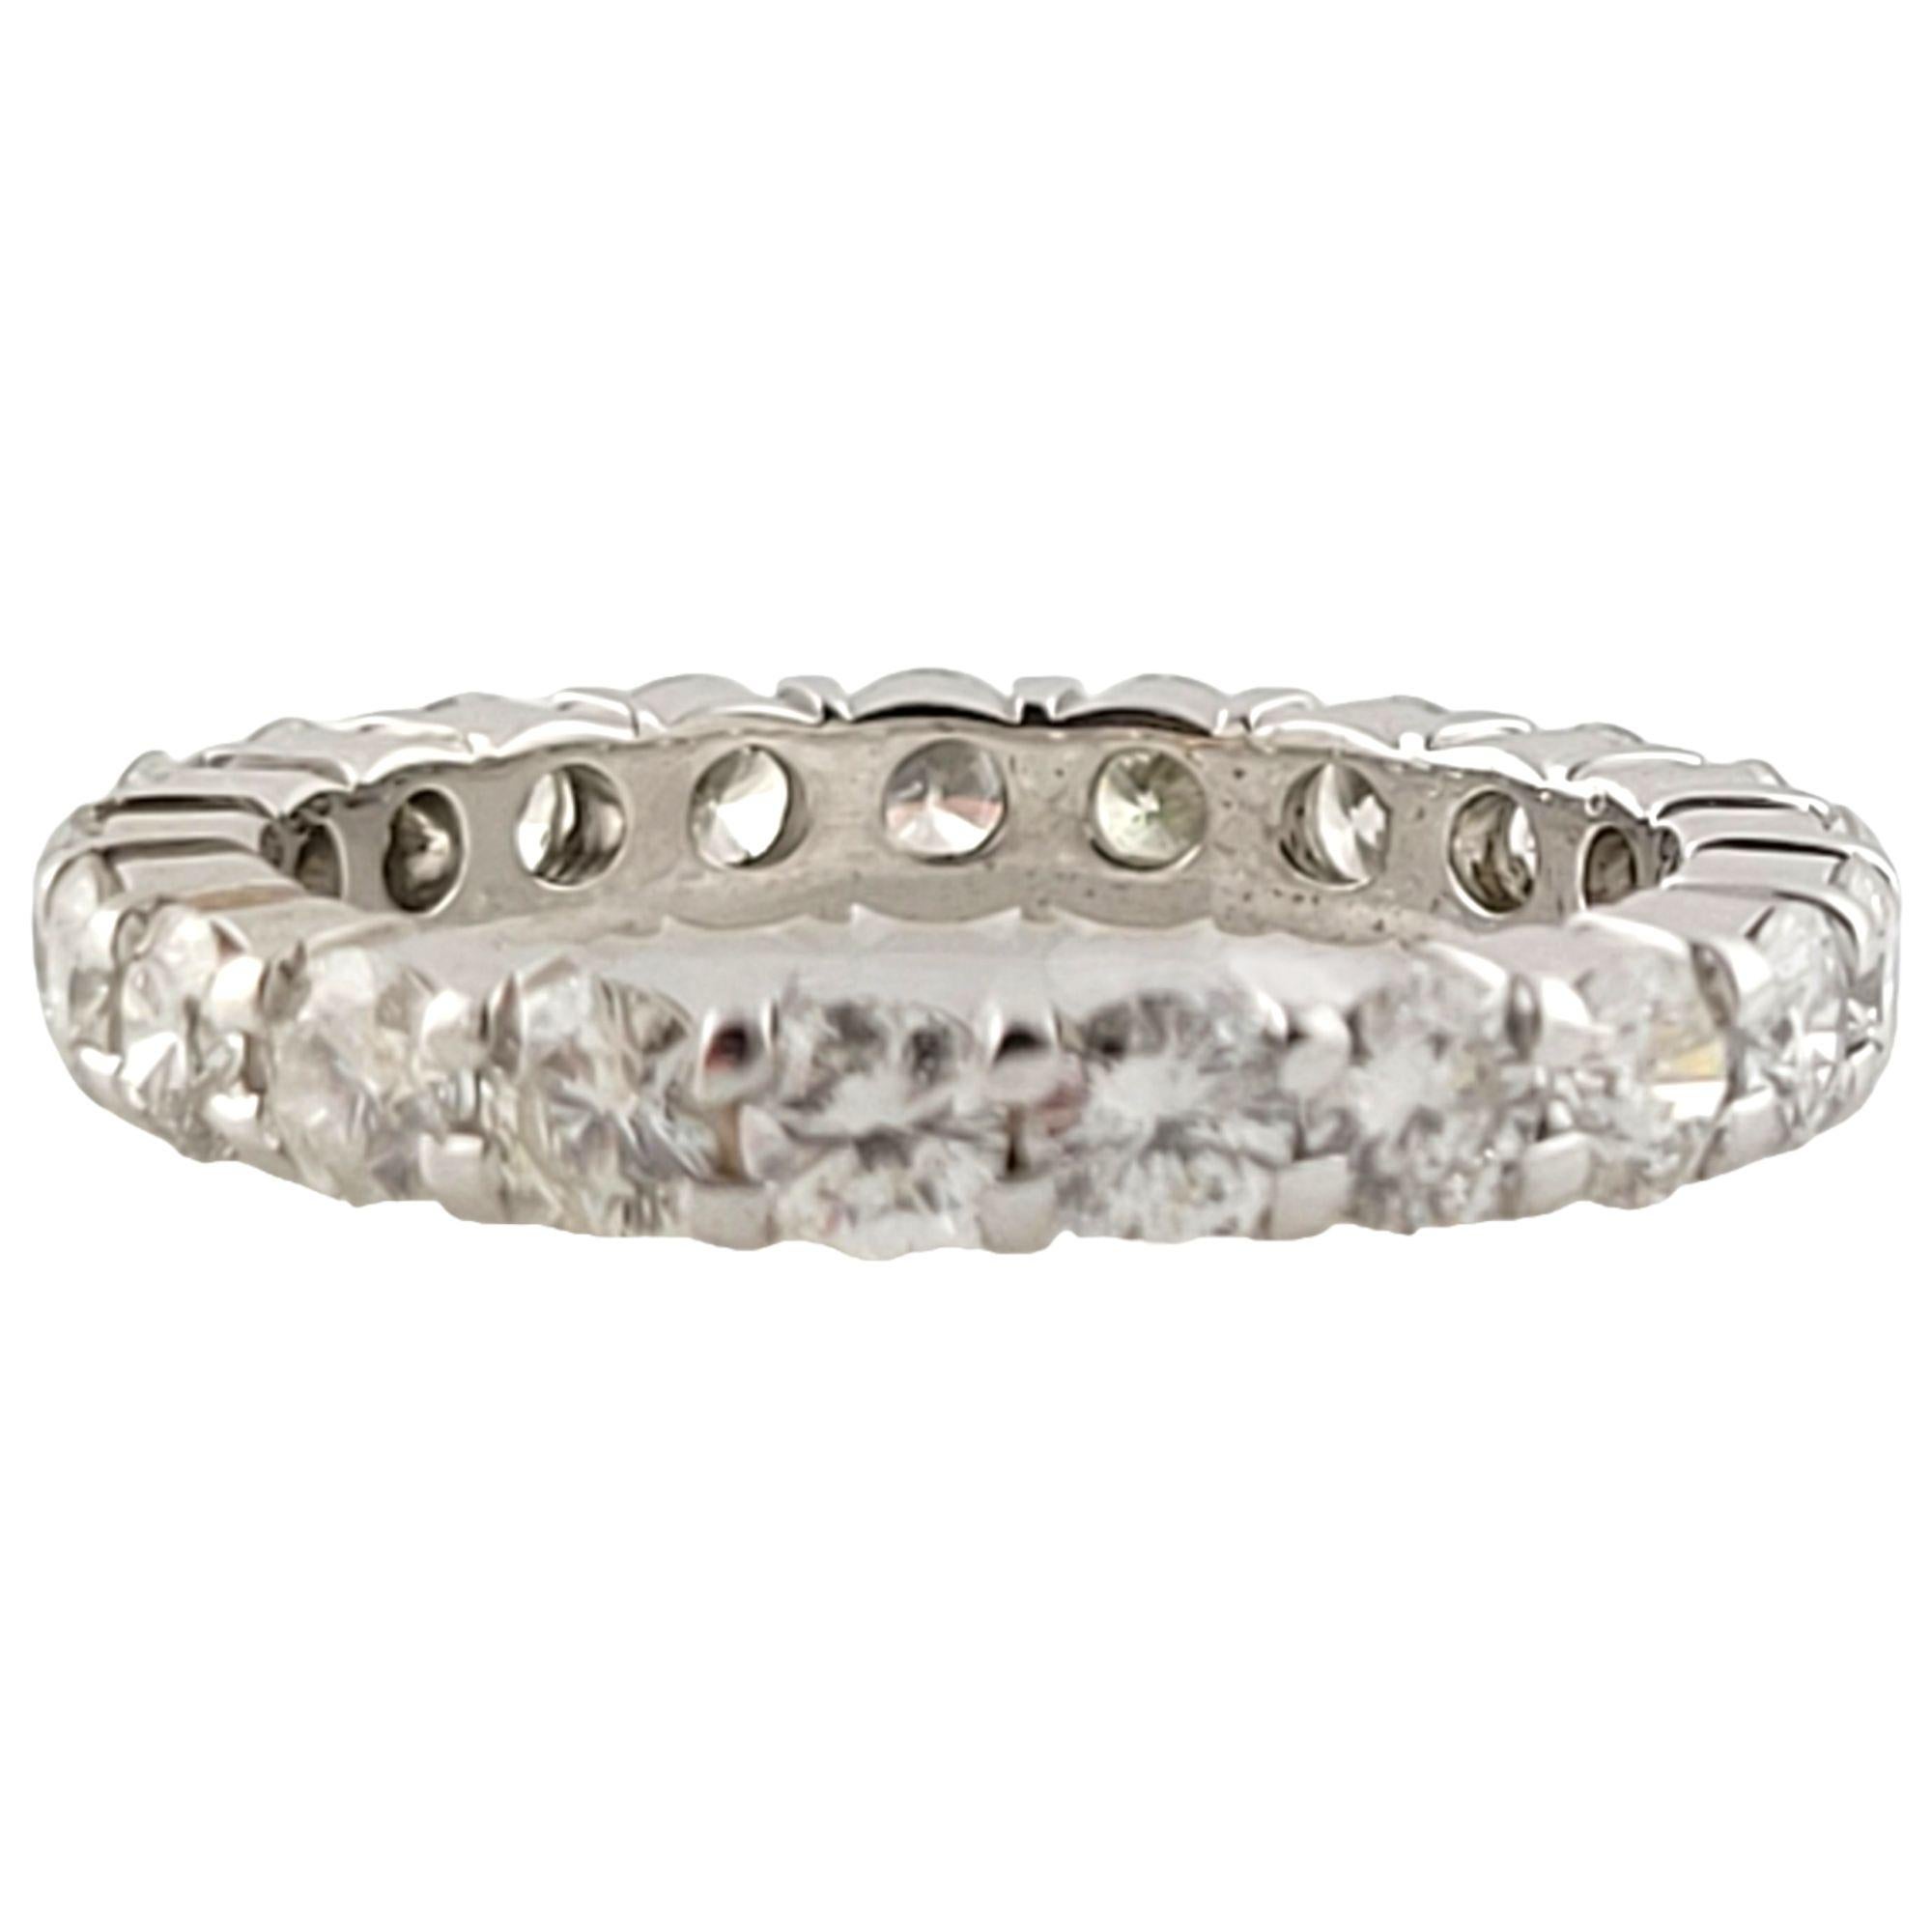 14 Karat White Gold Diamond Eternity Band

21 round brilliant diamonds are set in 14K white gold to create this lovely eternity band.

Diamond Clarity: I1
Diamond Color: H-I
Diamond carat weight: approx. 1.70cts total weight

Size 6.25

Stamped 14K